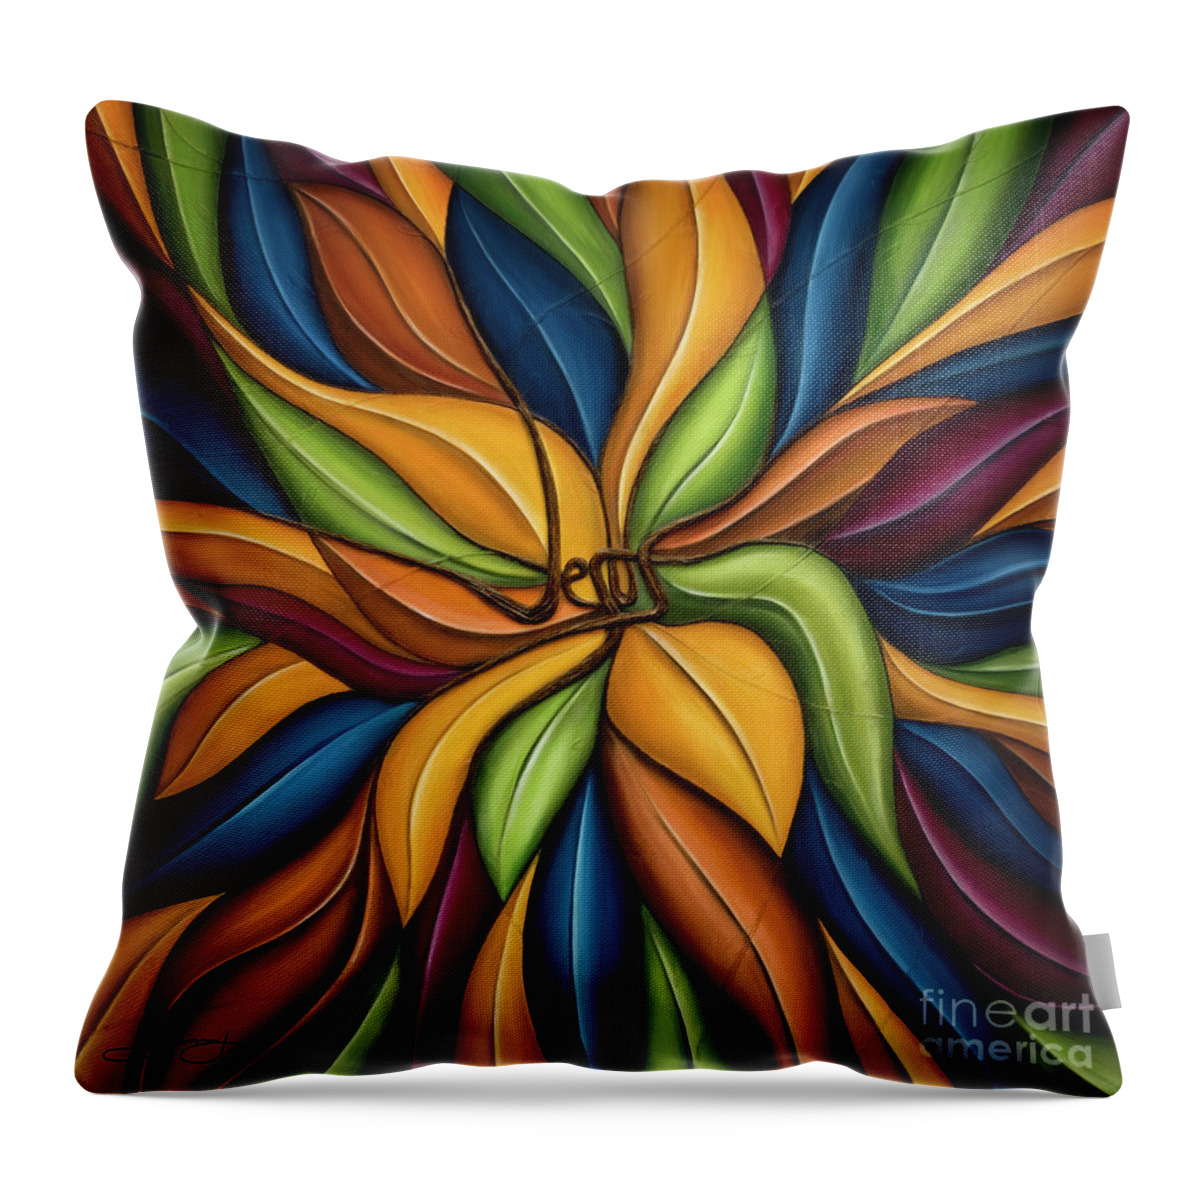 Artwork With Bible Verse Throw Pillow featuring the mixed media The Vine by Shevon Johnson